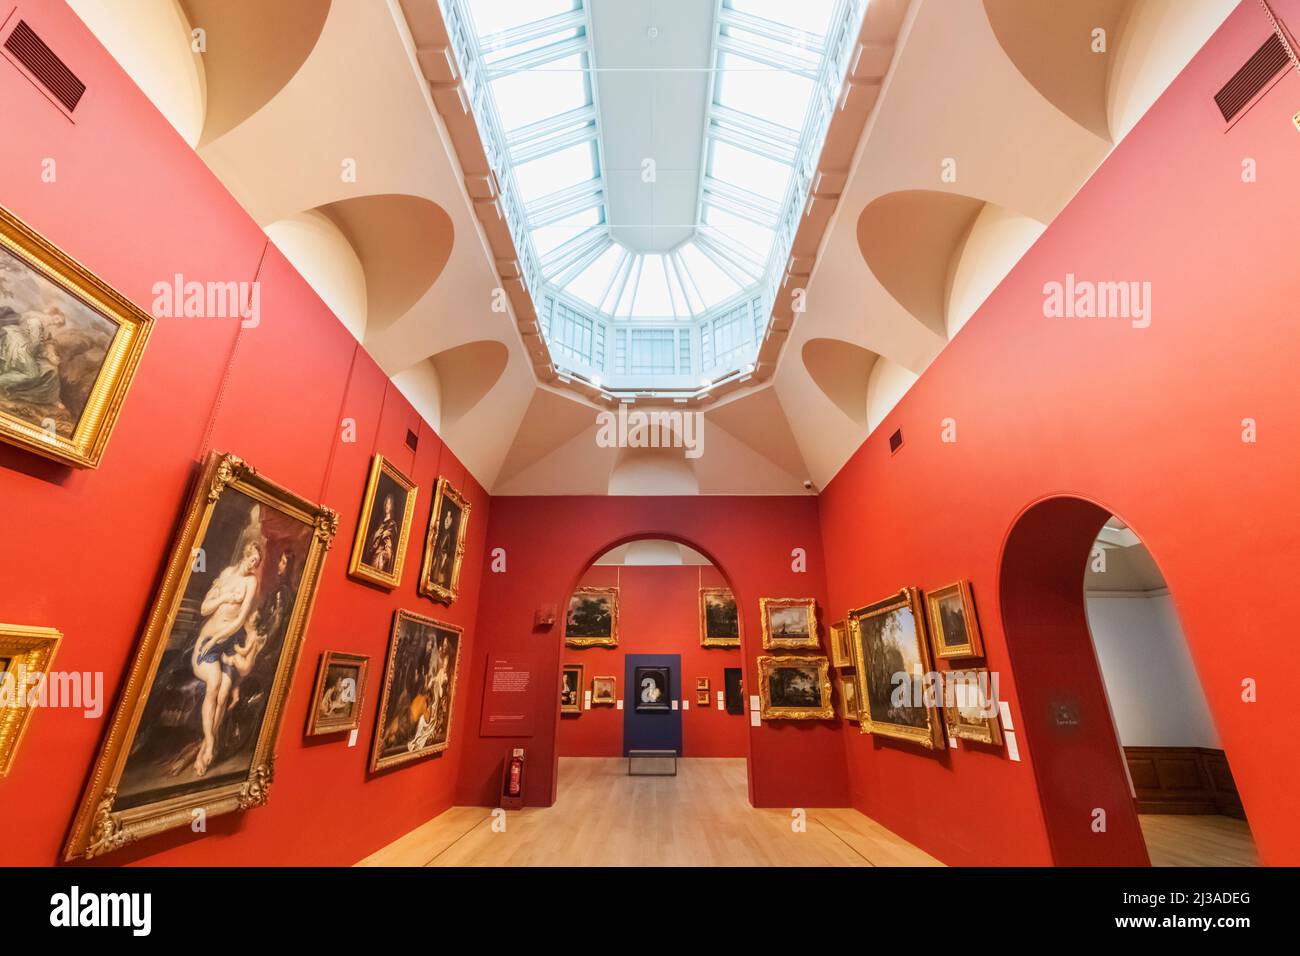 England, London, Dulwich, Dulwich Picture Gallery, Designed by Architect John Soane, Interior View Stock Photo